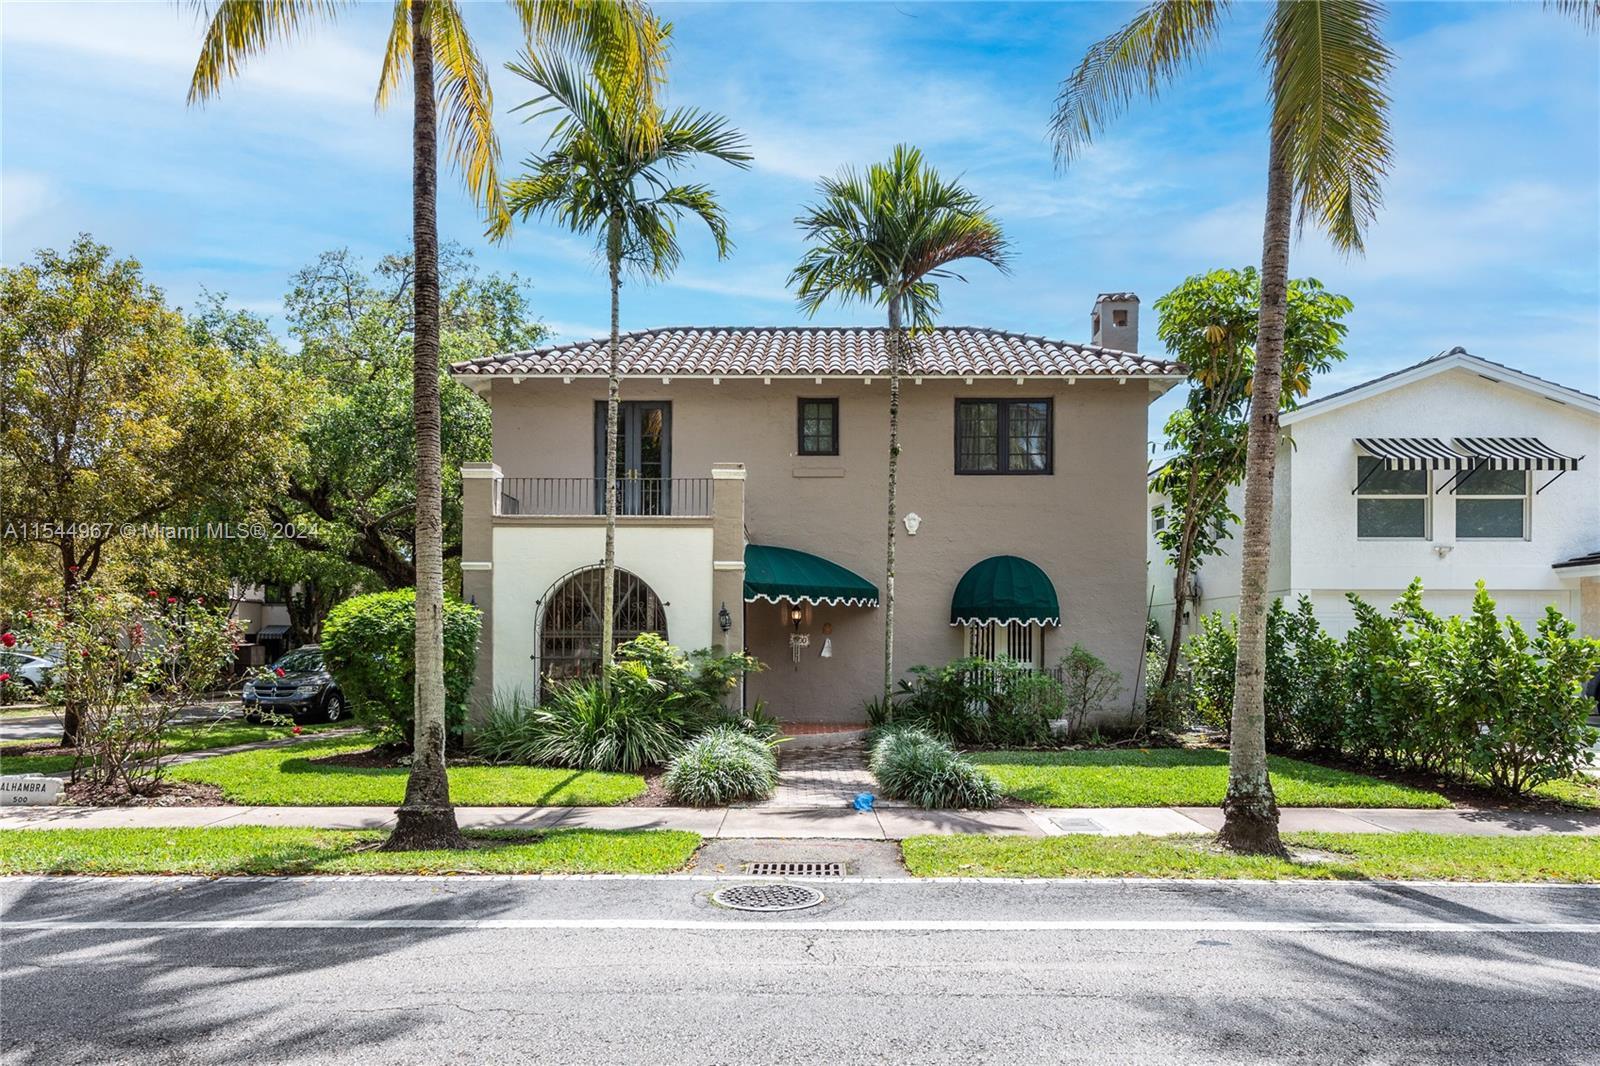 Photo of 500 Alhambra Cir in Coral Gables, FL